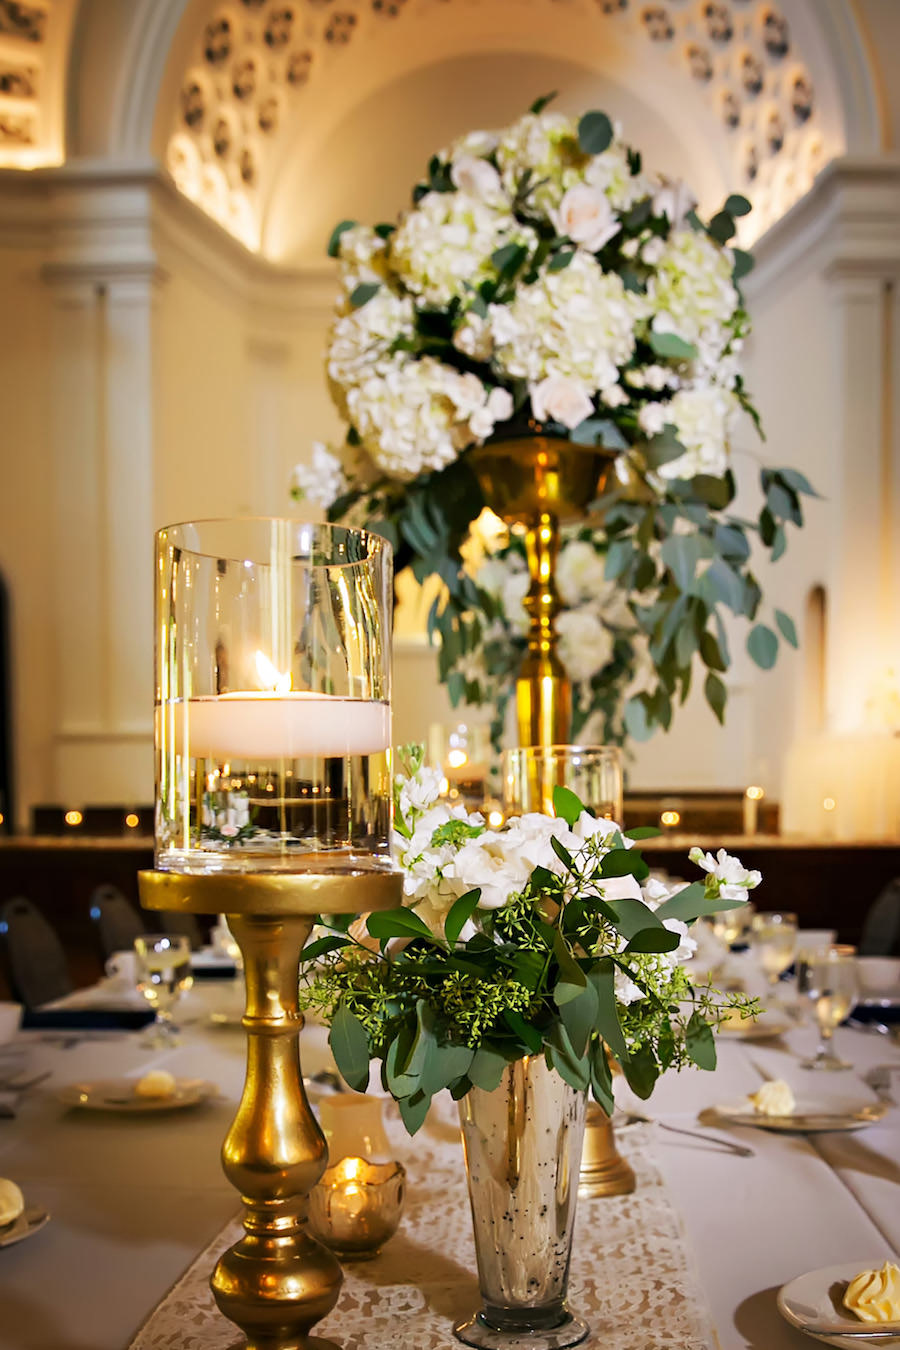 Elegant and Traditional Wedding Reception Décor with Gold and Ivory Centerpieces in Tall Vases with Cascading Greenery and Hydrangeas | St. Pete Wedding Florist Iza’s Flowers | Special Moments Wedding Planner